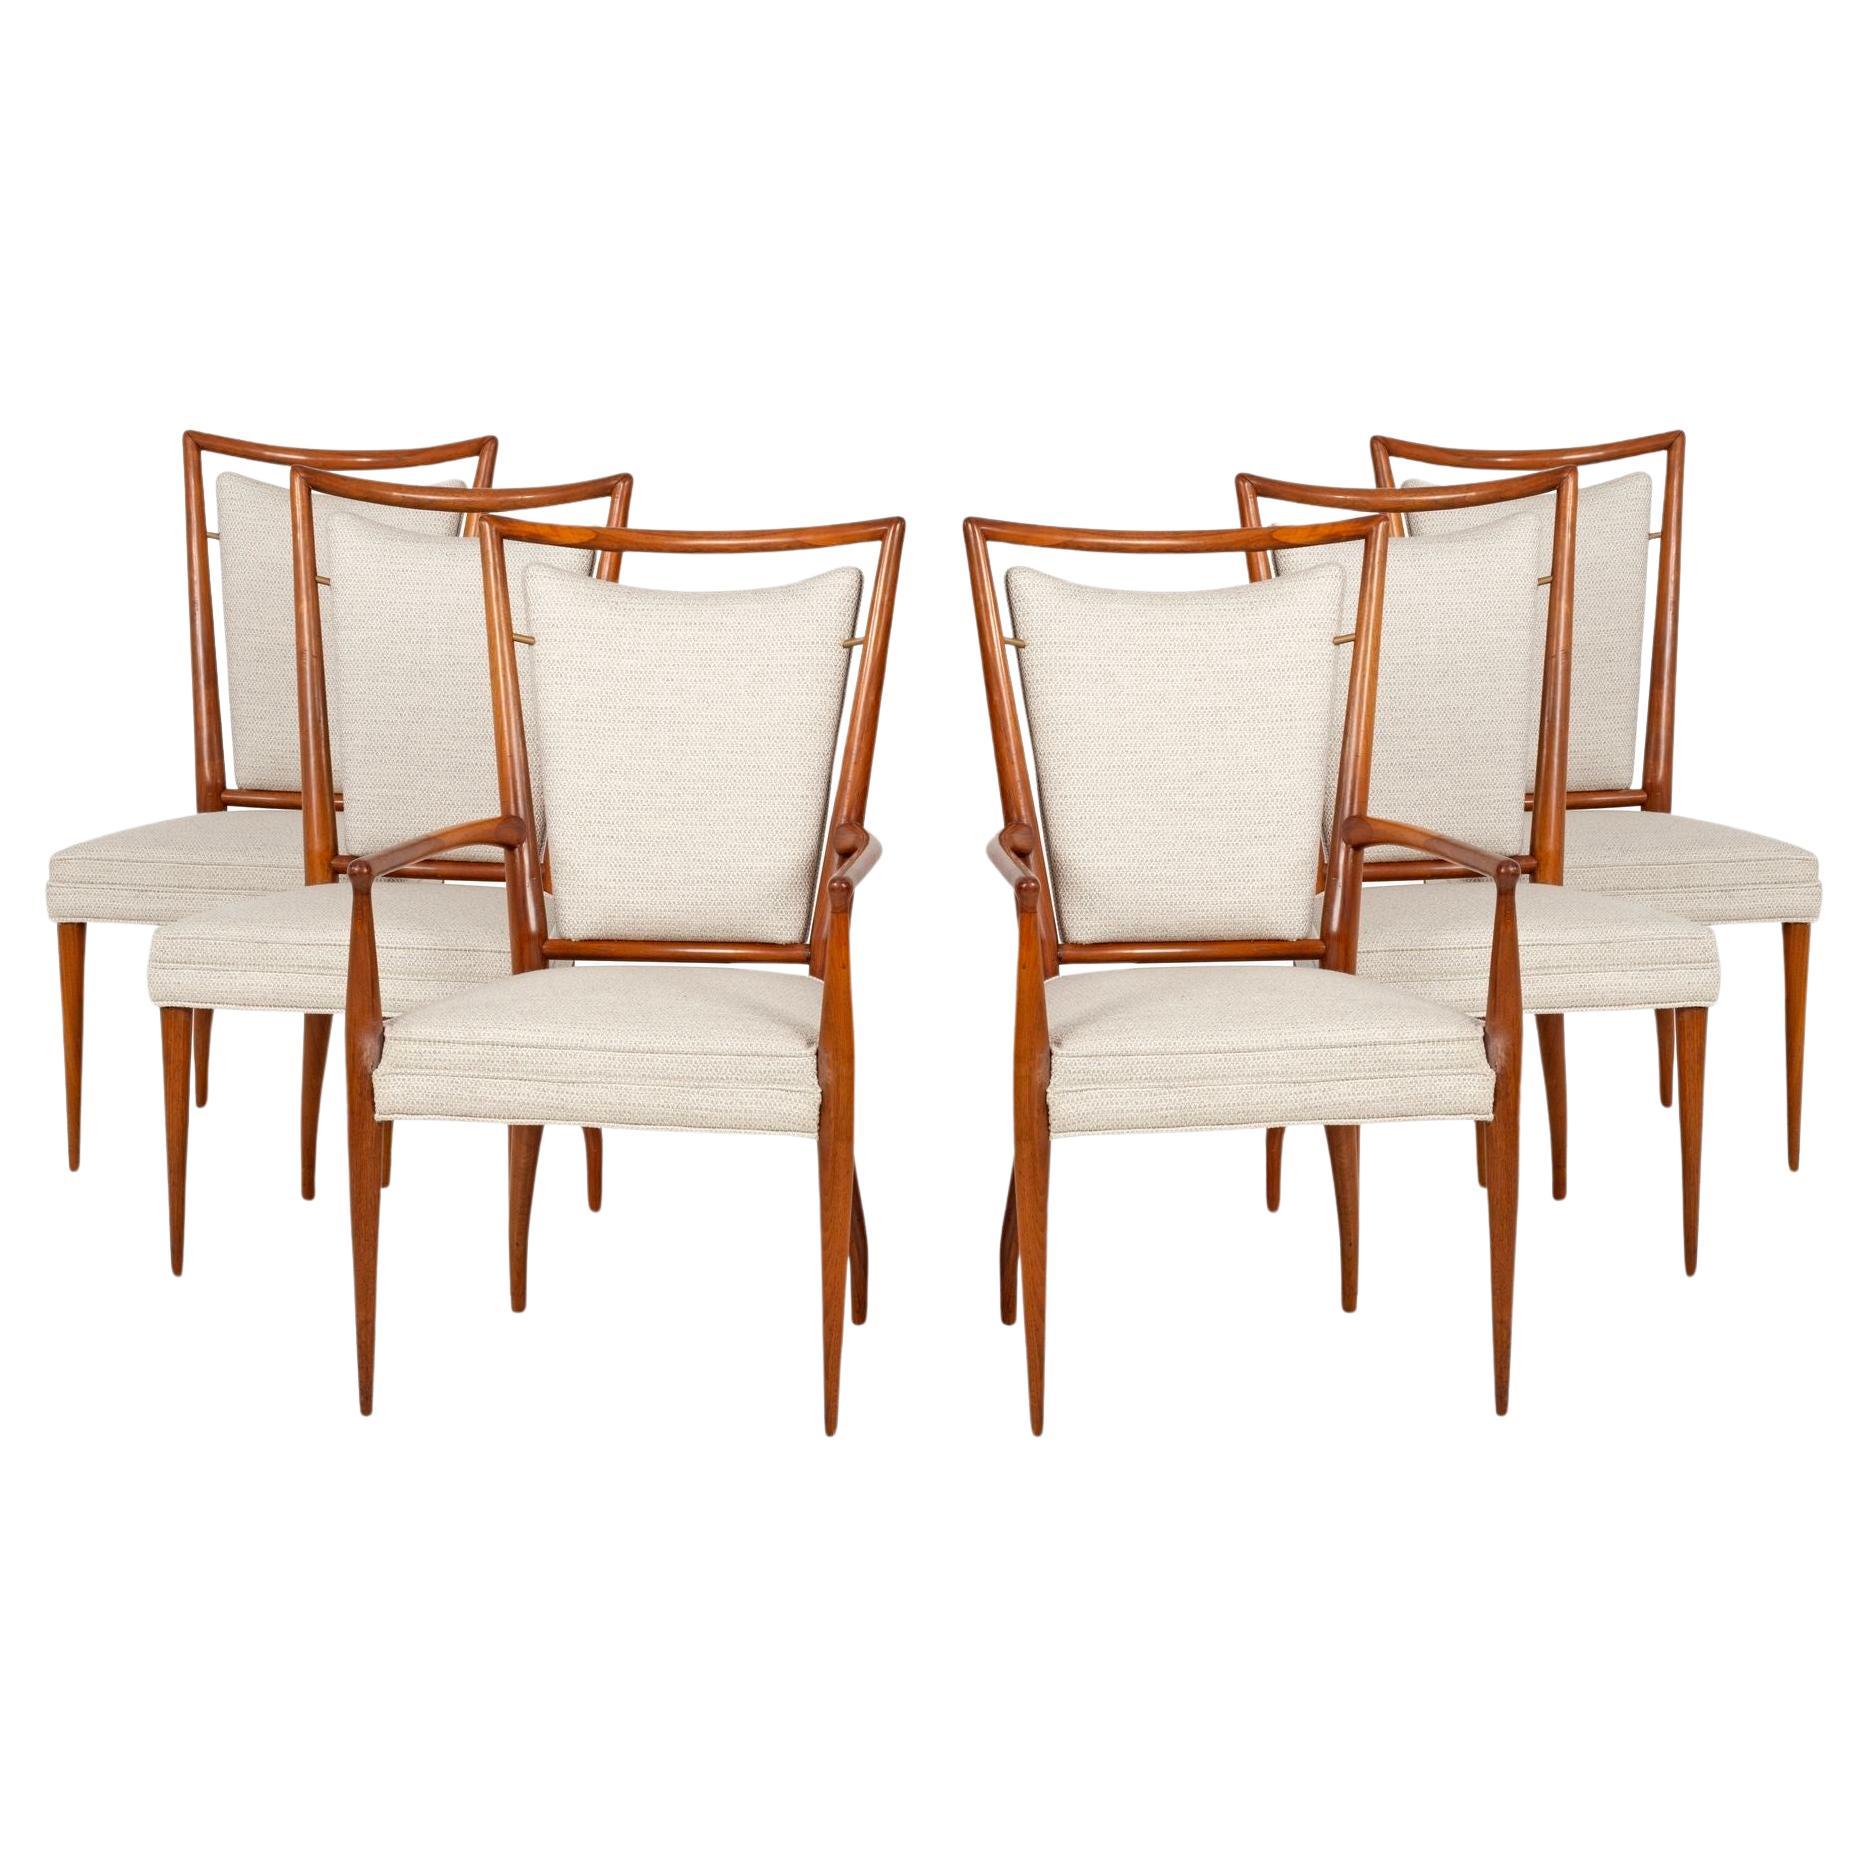 Pair of Six Dining Chairs by J. Stuart Clingman for Widdicomb For Sale